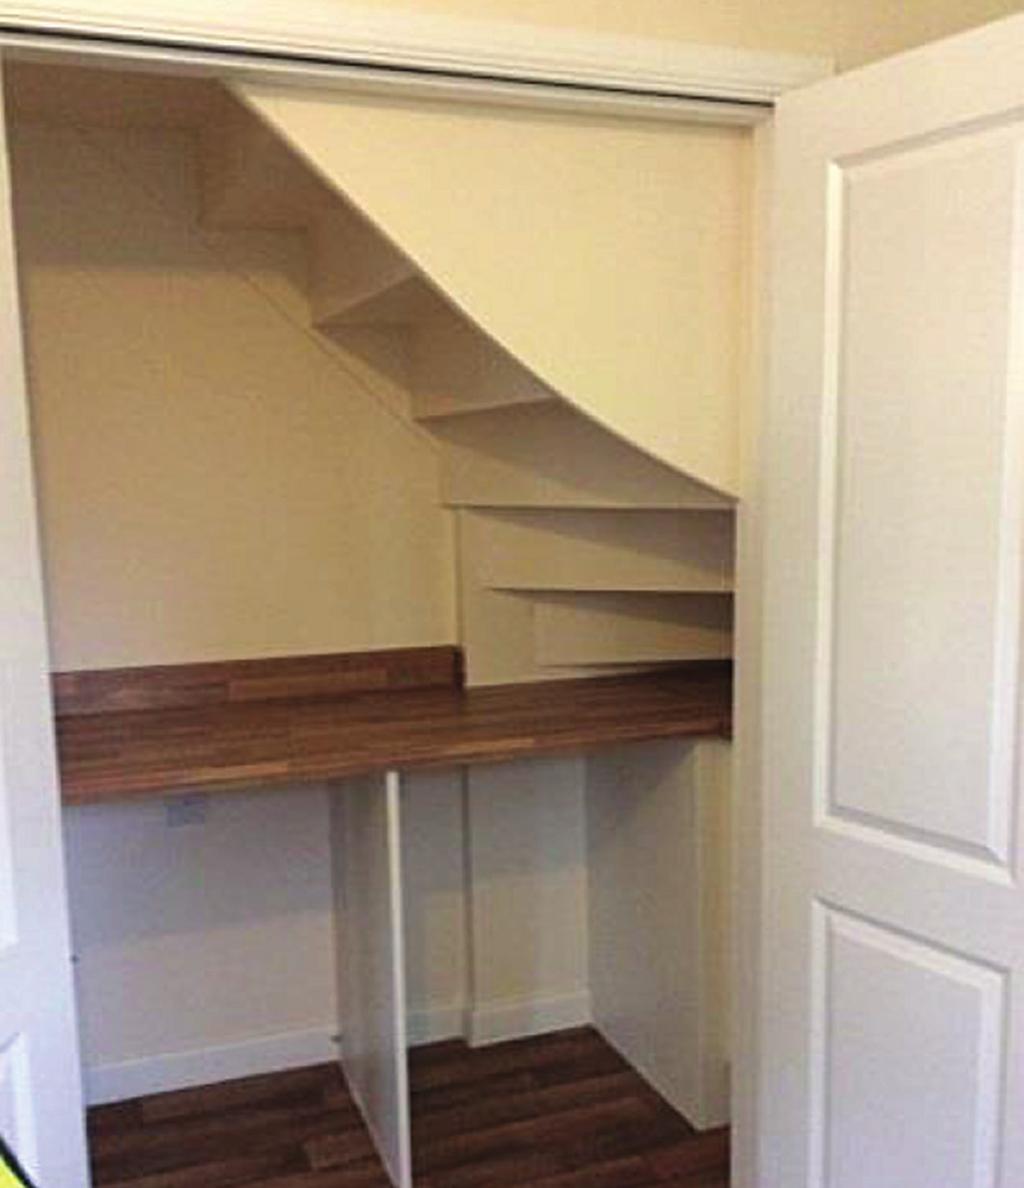 11 - HOUSING Stairs Where stair strings are exposed and the stair forms part of a protected stairwell which has an enclosed utility room or cupboard beneath it, or forms part of a ceiling to a